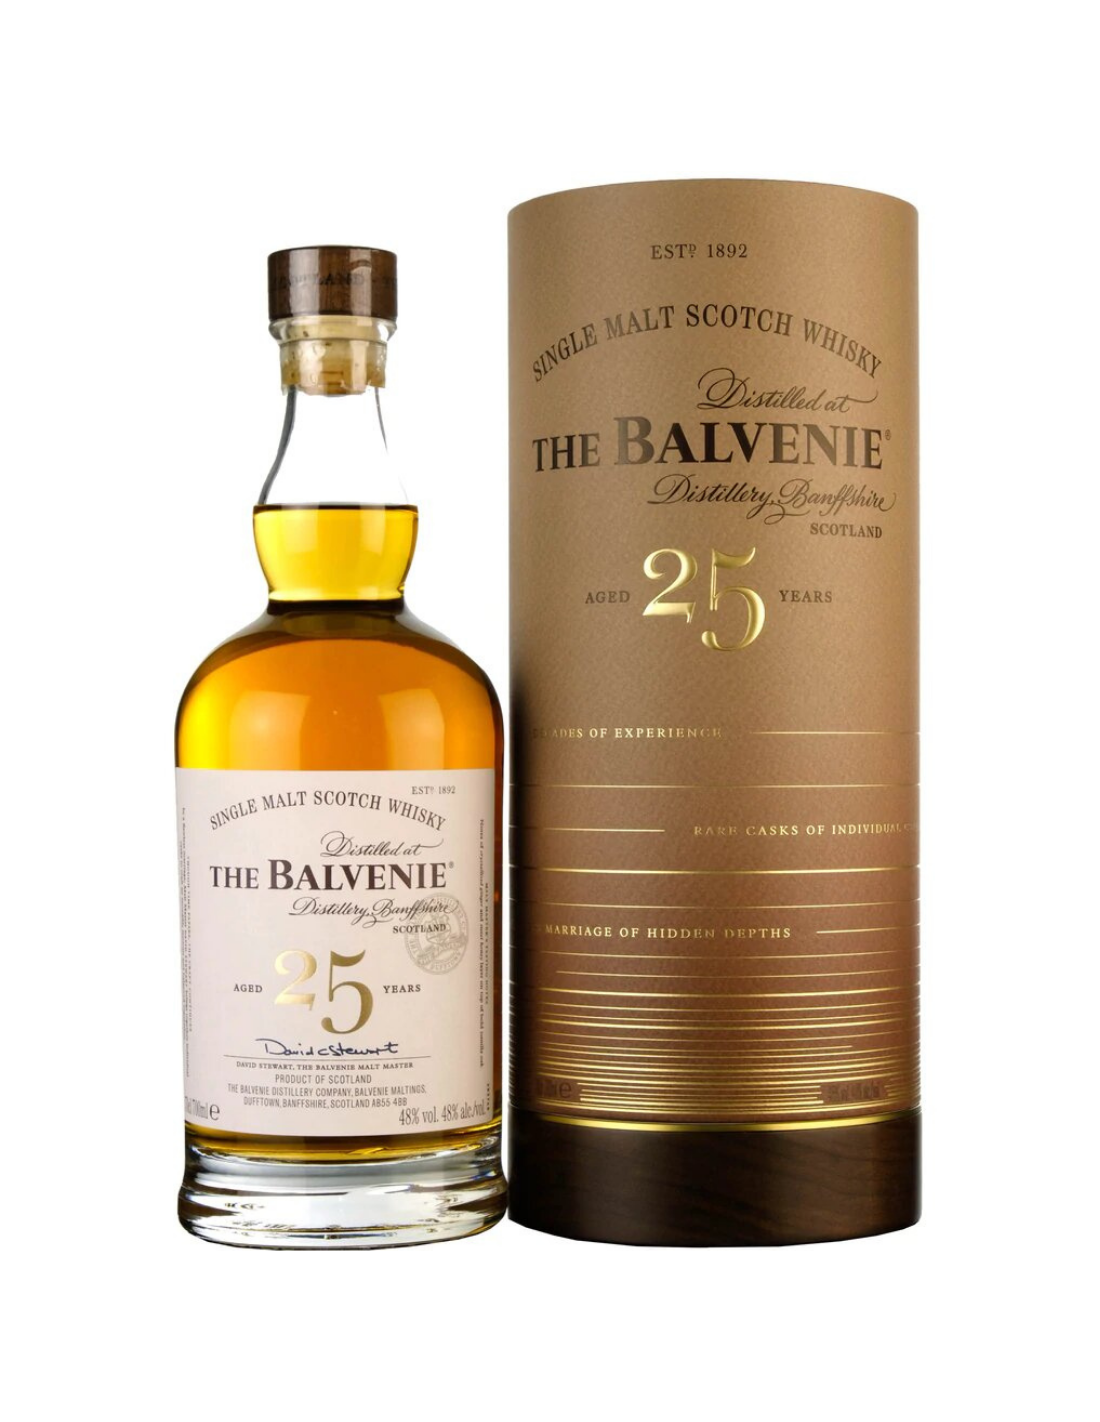 Whisky The Balvenie 25 Years Old Rare Marriages, 0.7L, 48% alc., Scotia alcooldiscount.ro